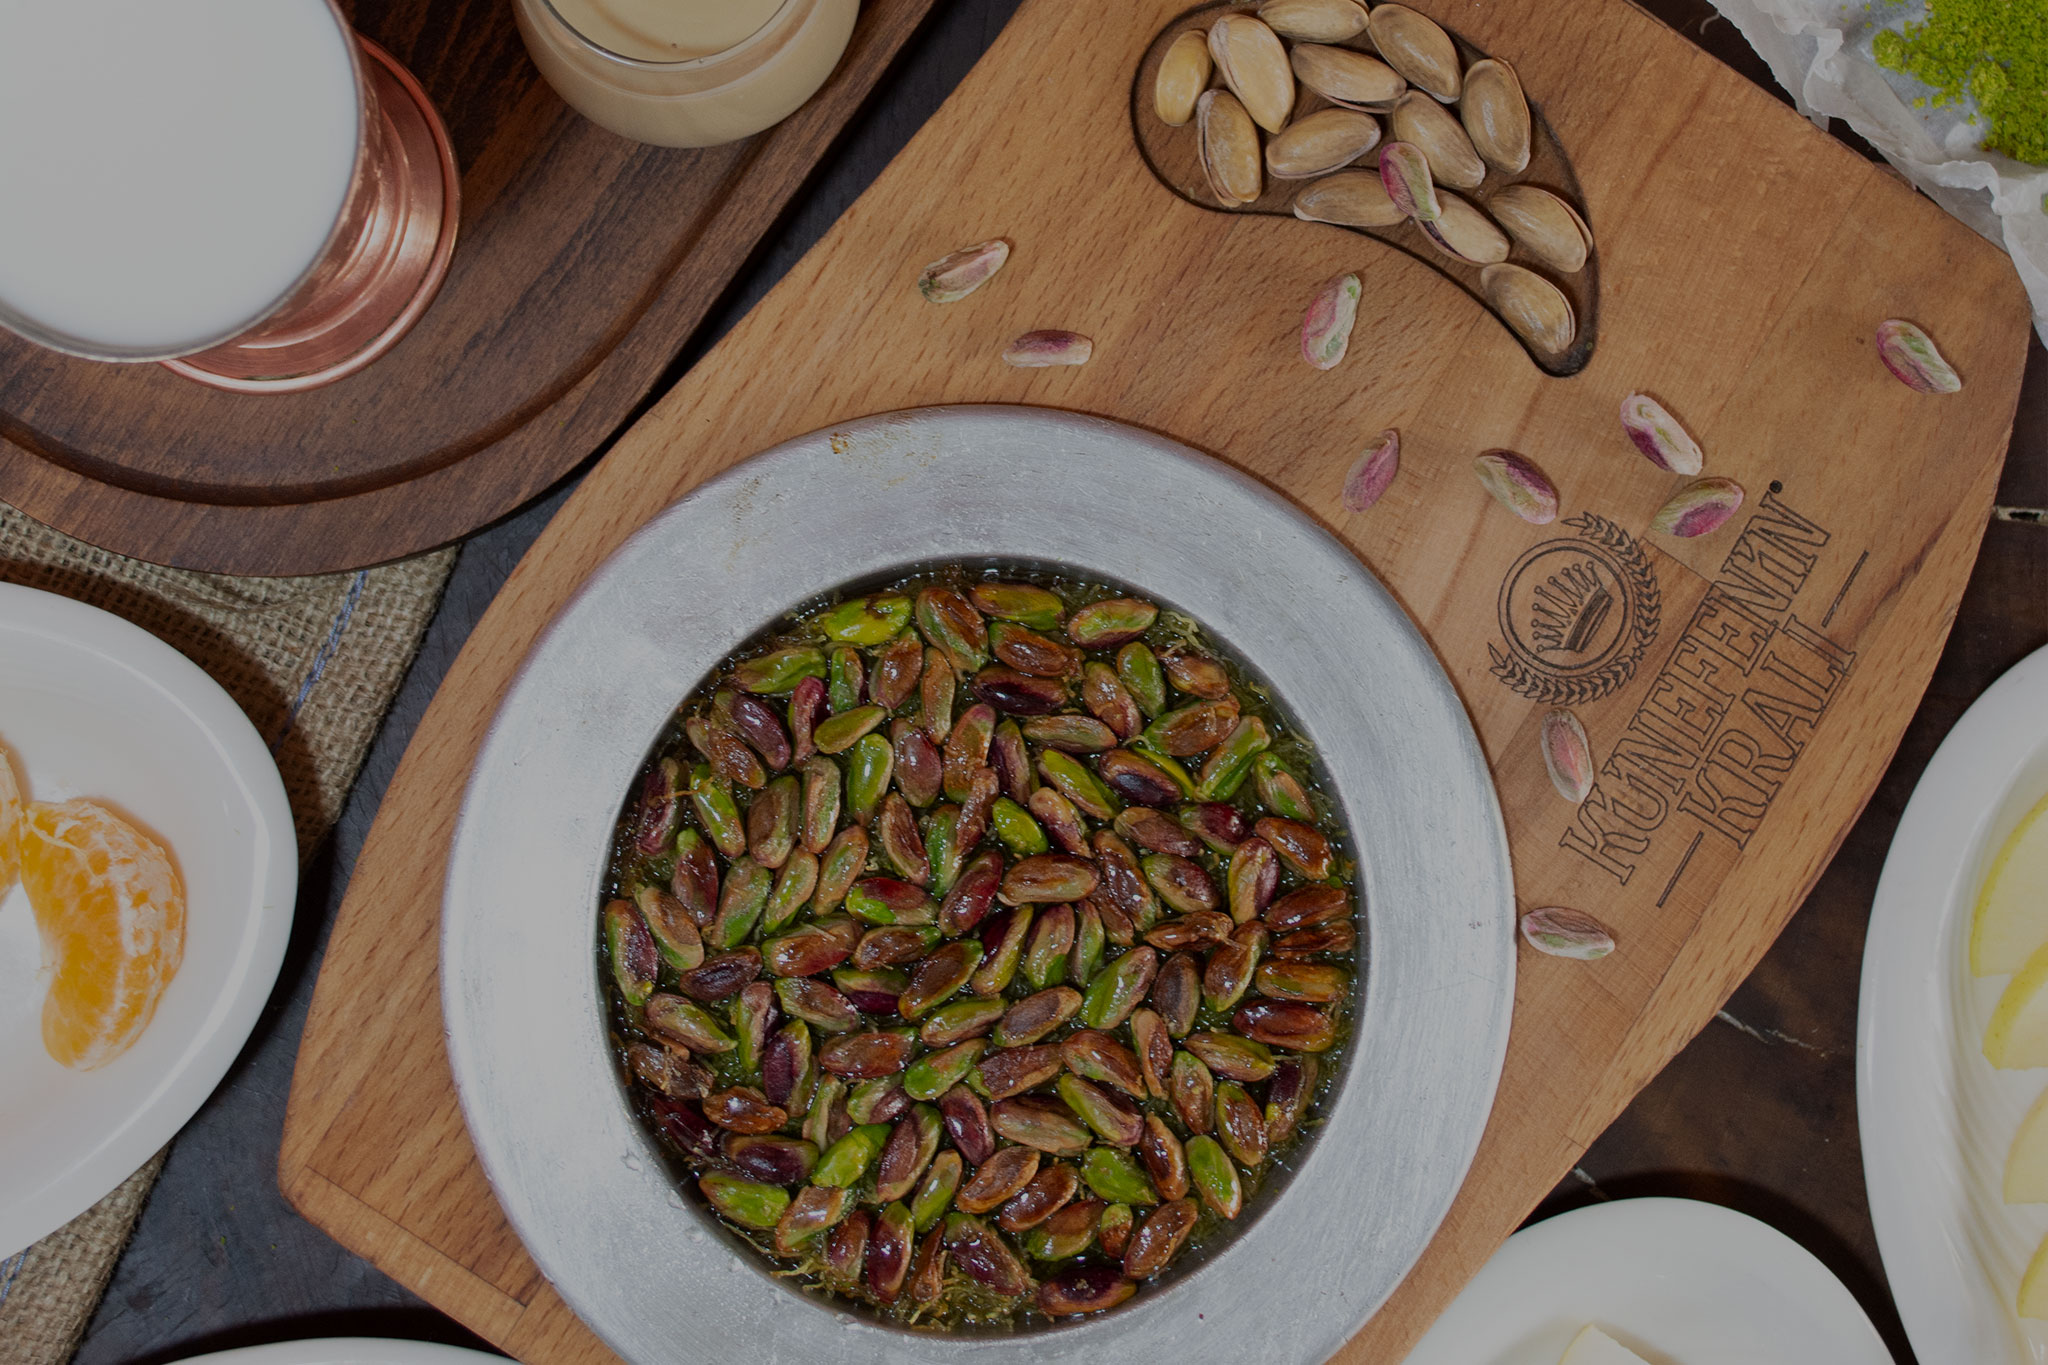 Kunefes Prepared with Special Pistachios